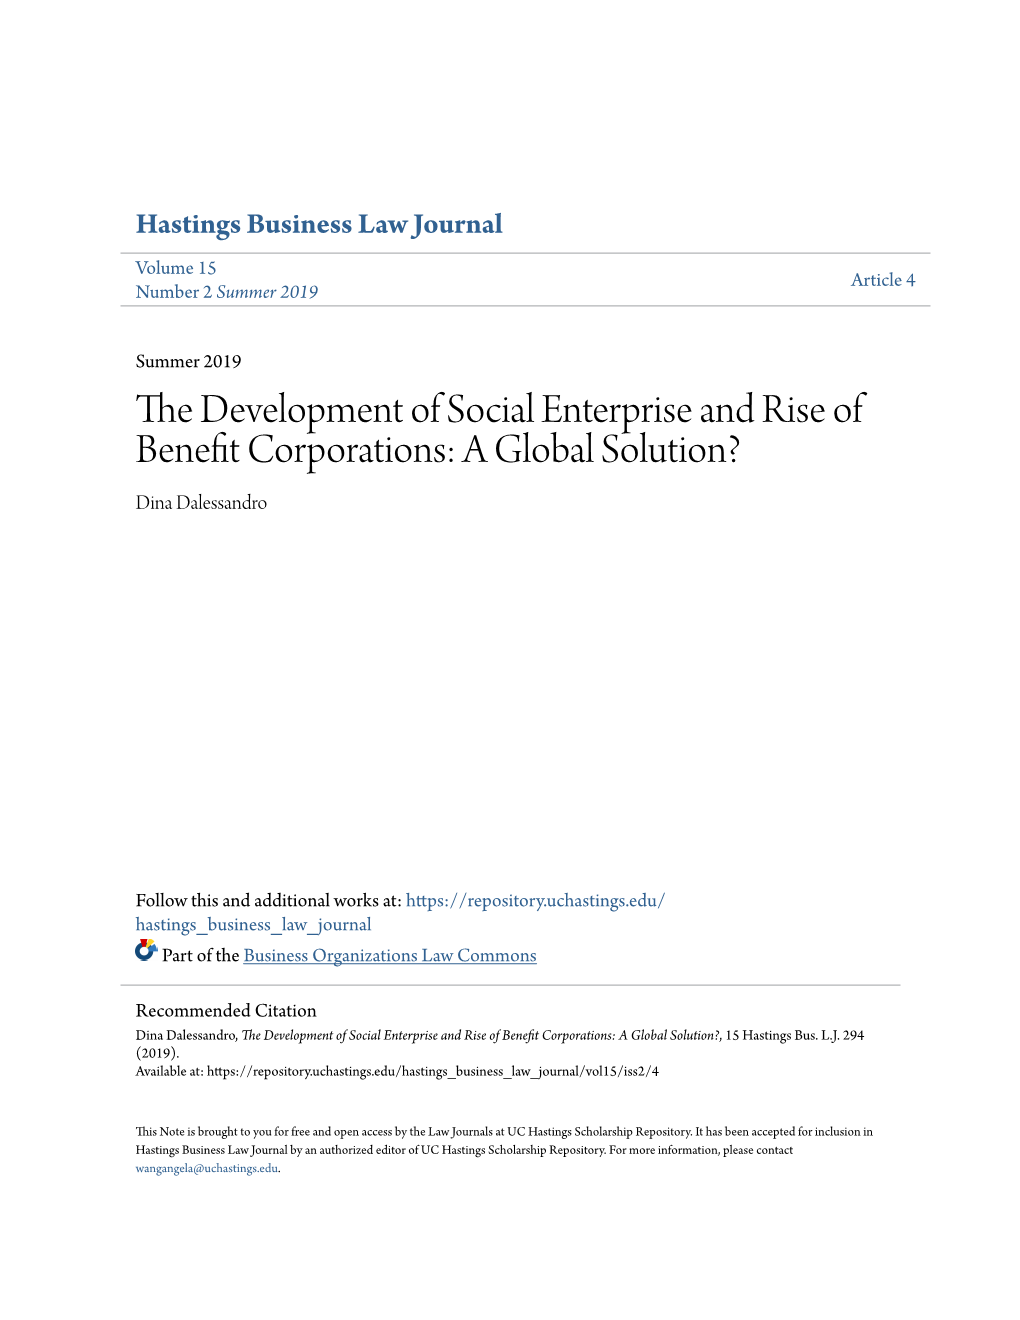 The Development of Social Enterprise and Rise of Benefit Corporations: a Global Solution?, 15 Hastings Bus